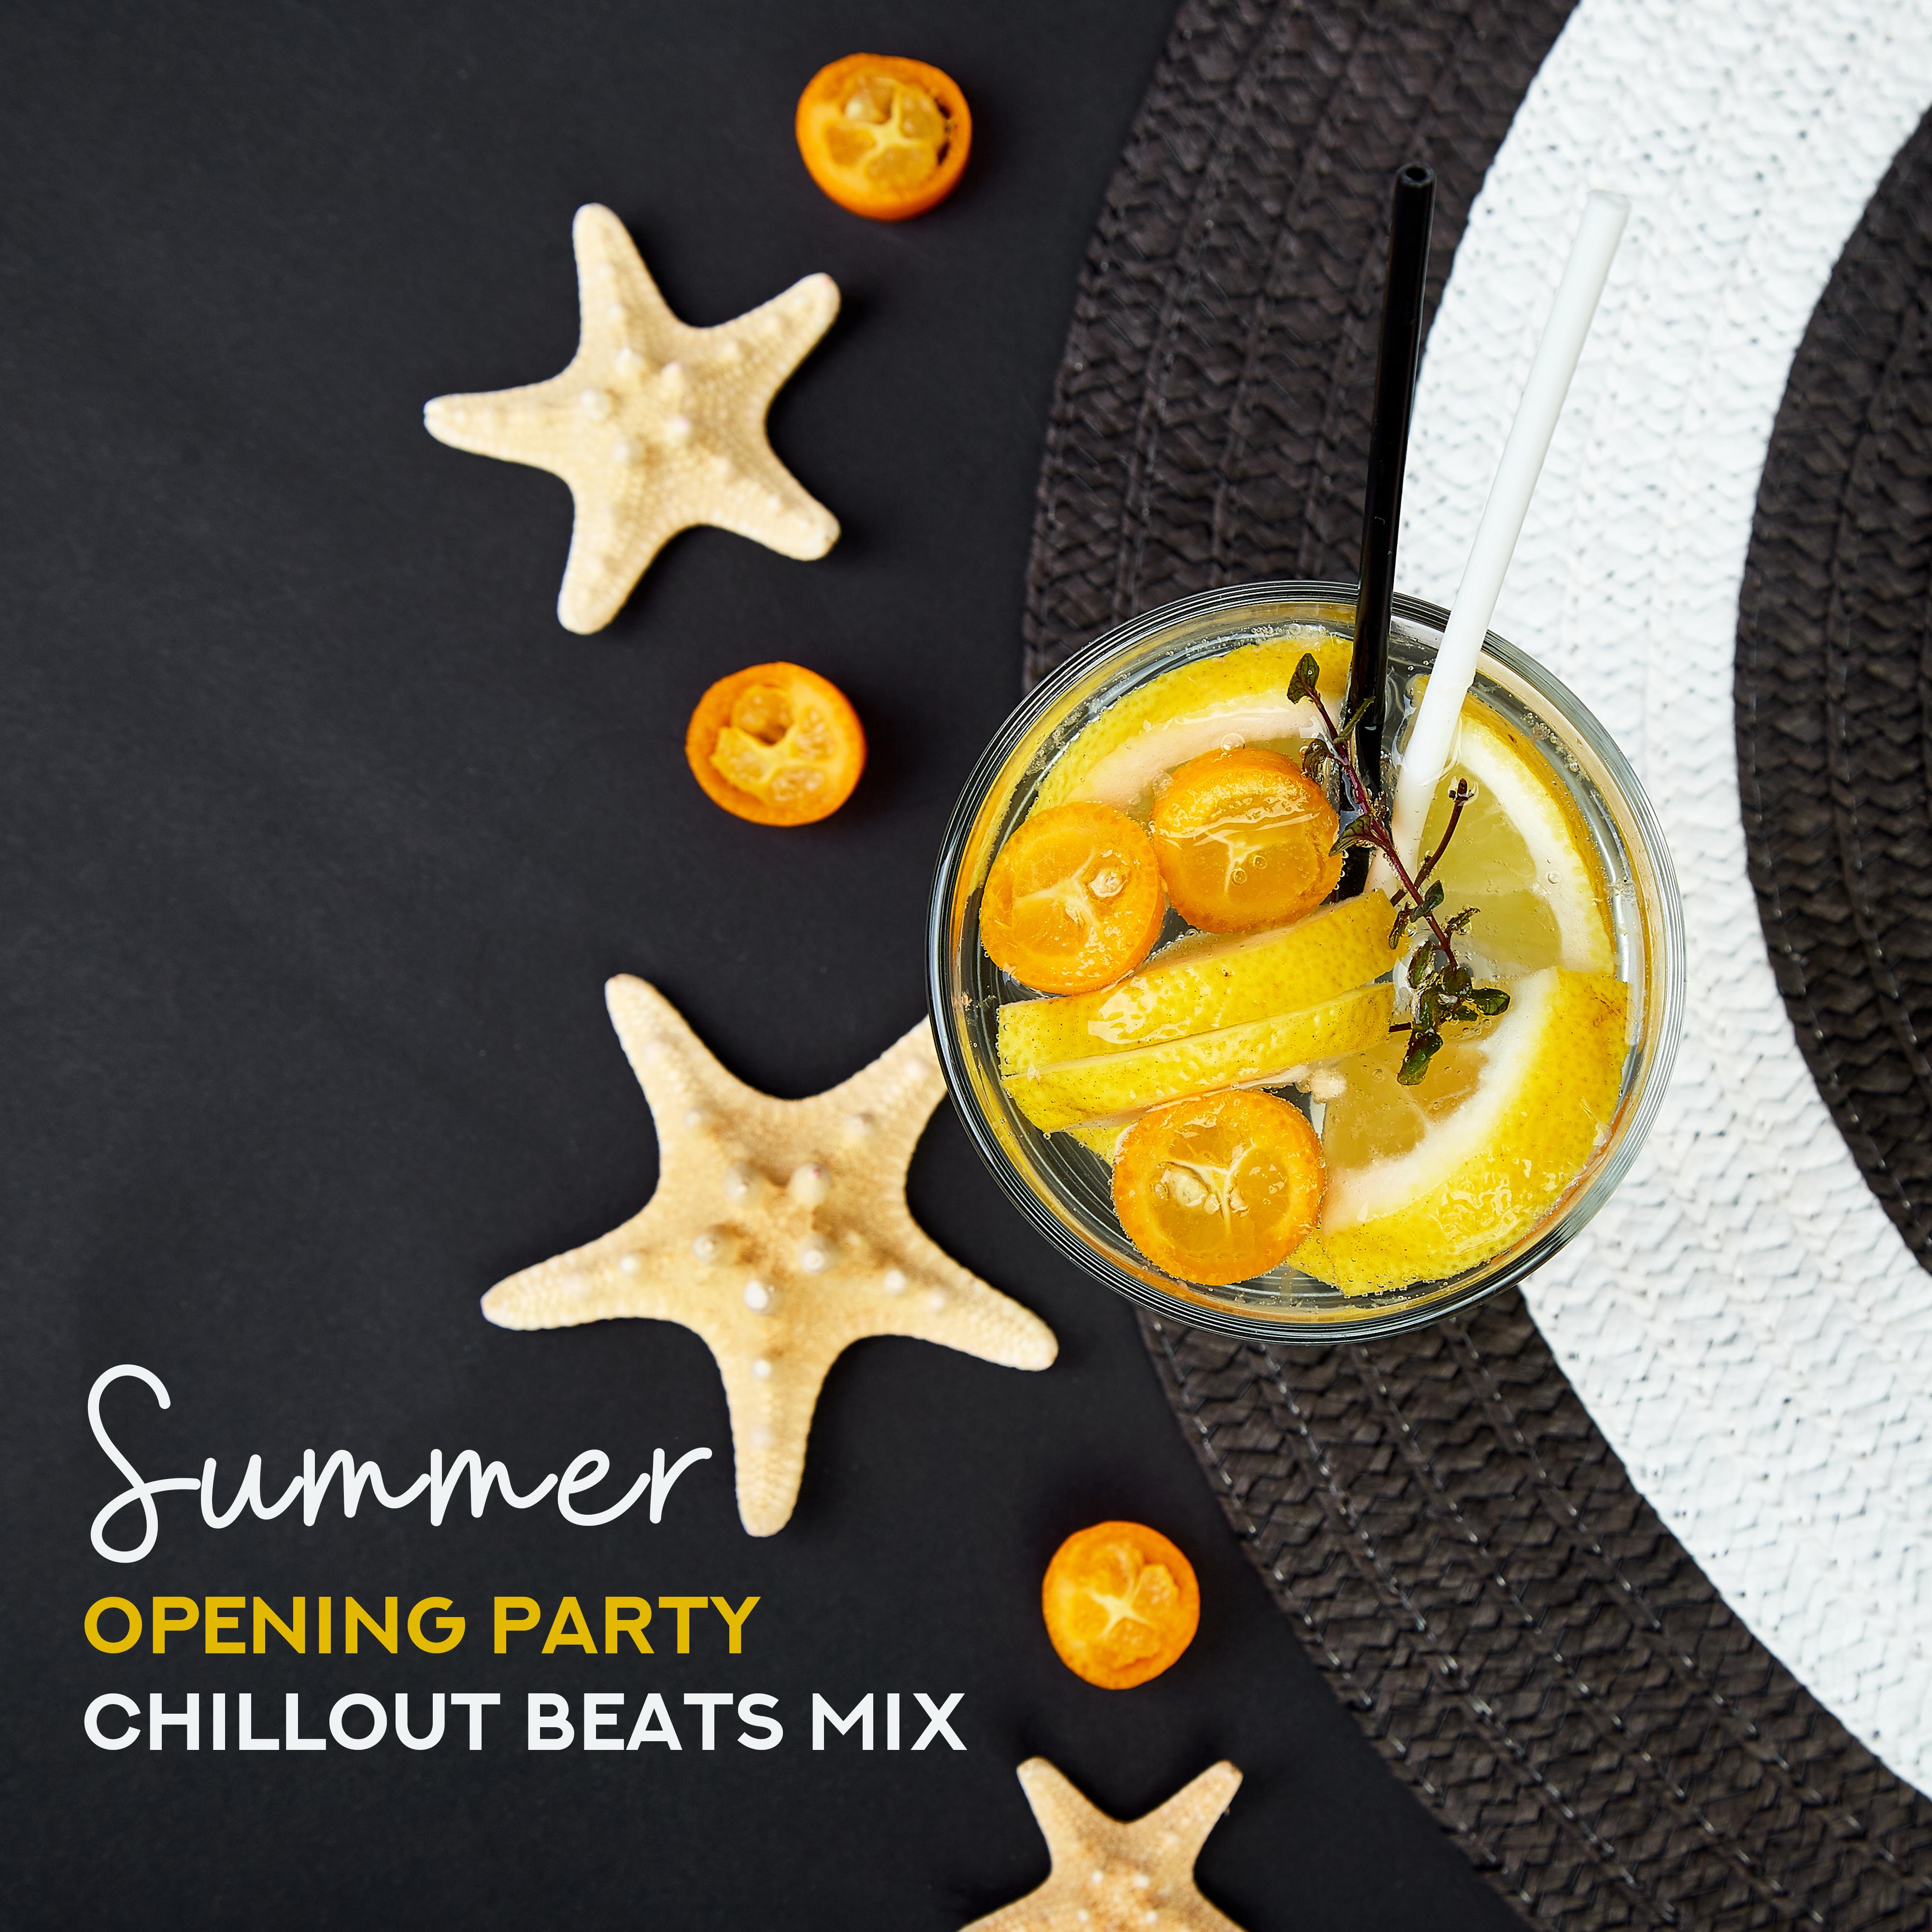 Summer Opening Party Chillout Beats Mix: 2019 Electronic Chill Out Positive Vibes to Perfect Start a Summer Vacation, Total Relaxing Holiday Music, Beach Dance Party Soft Sounds